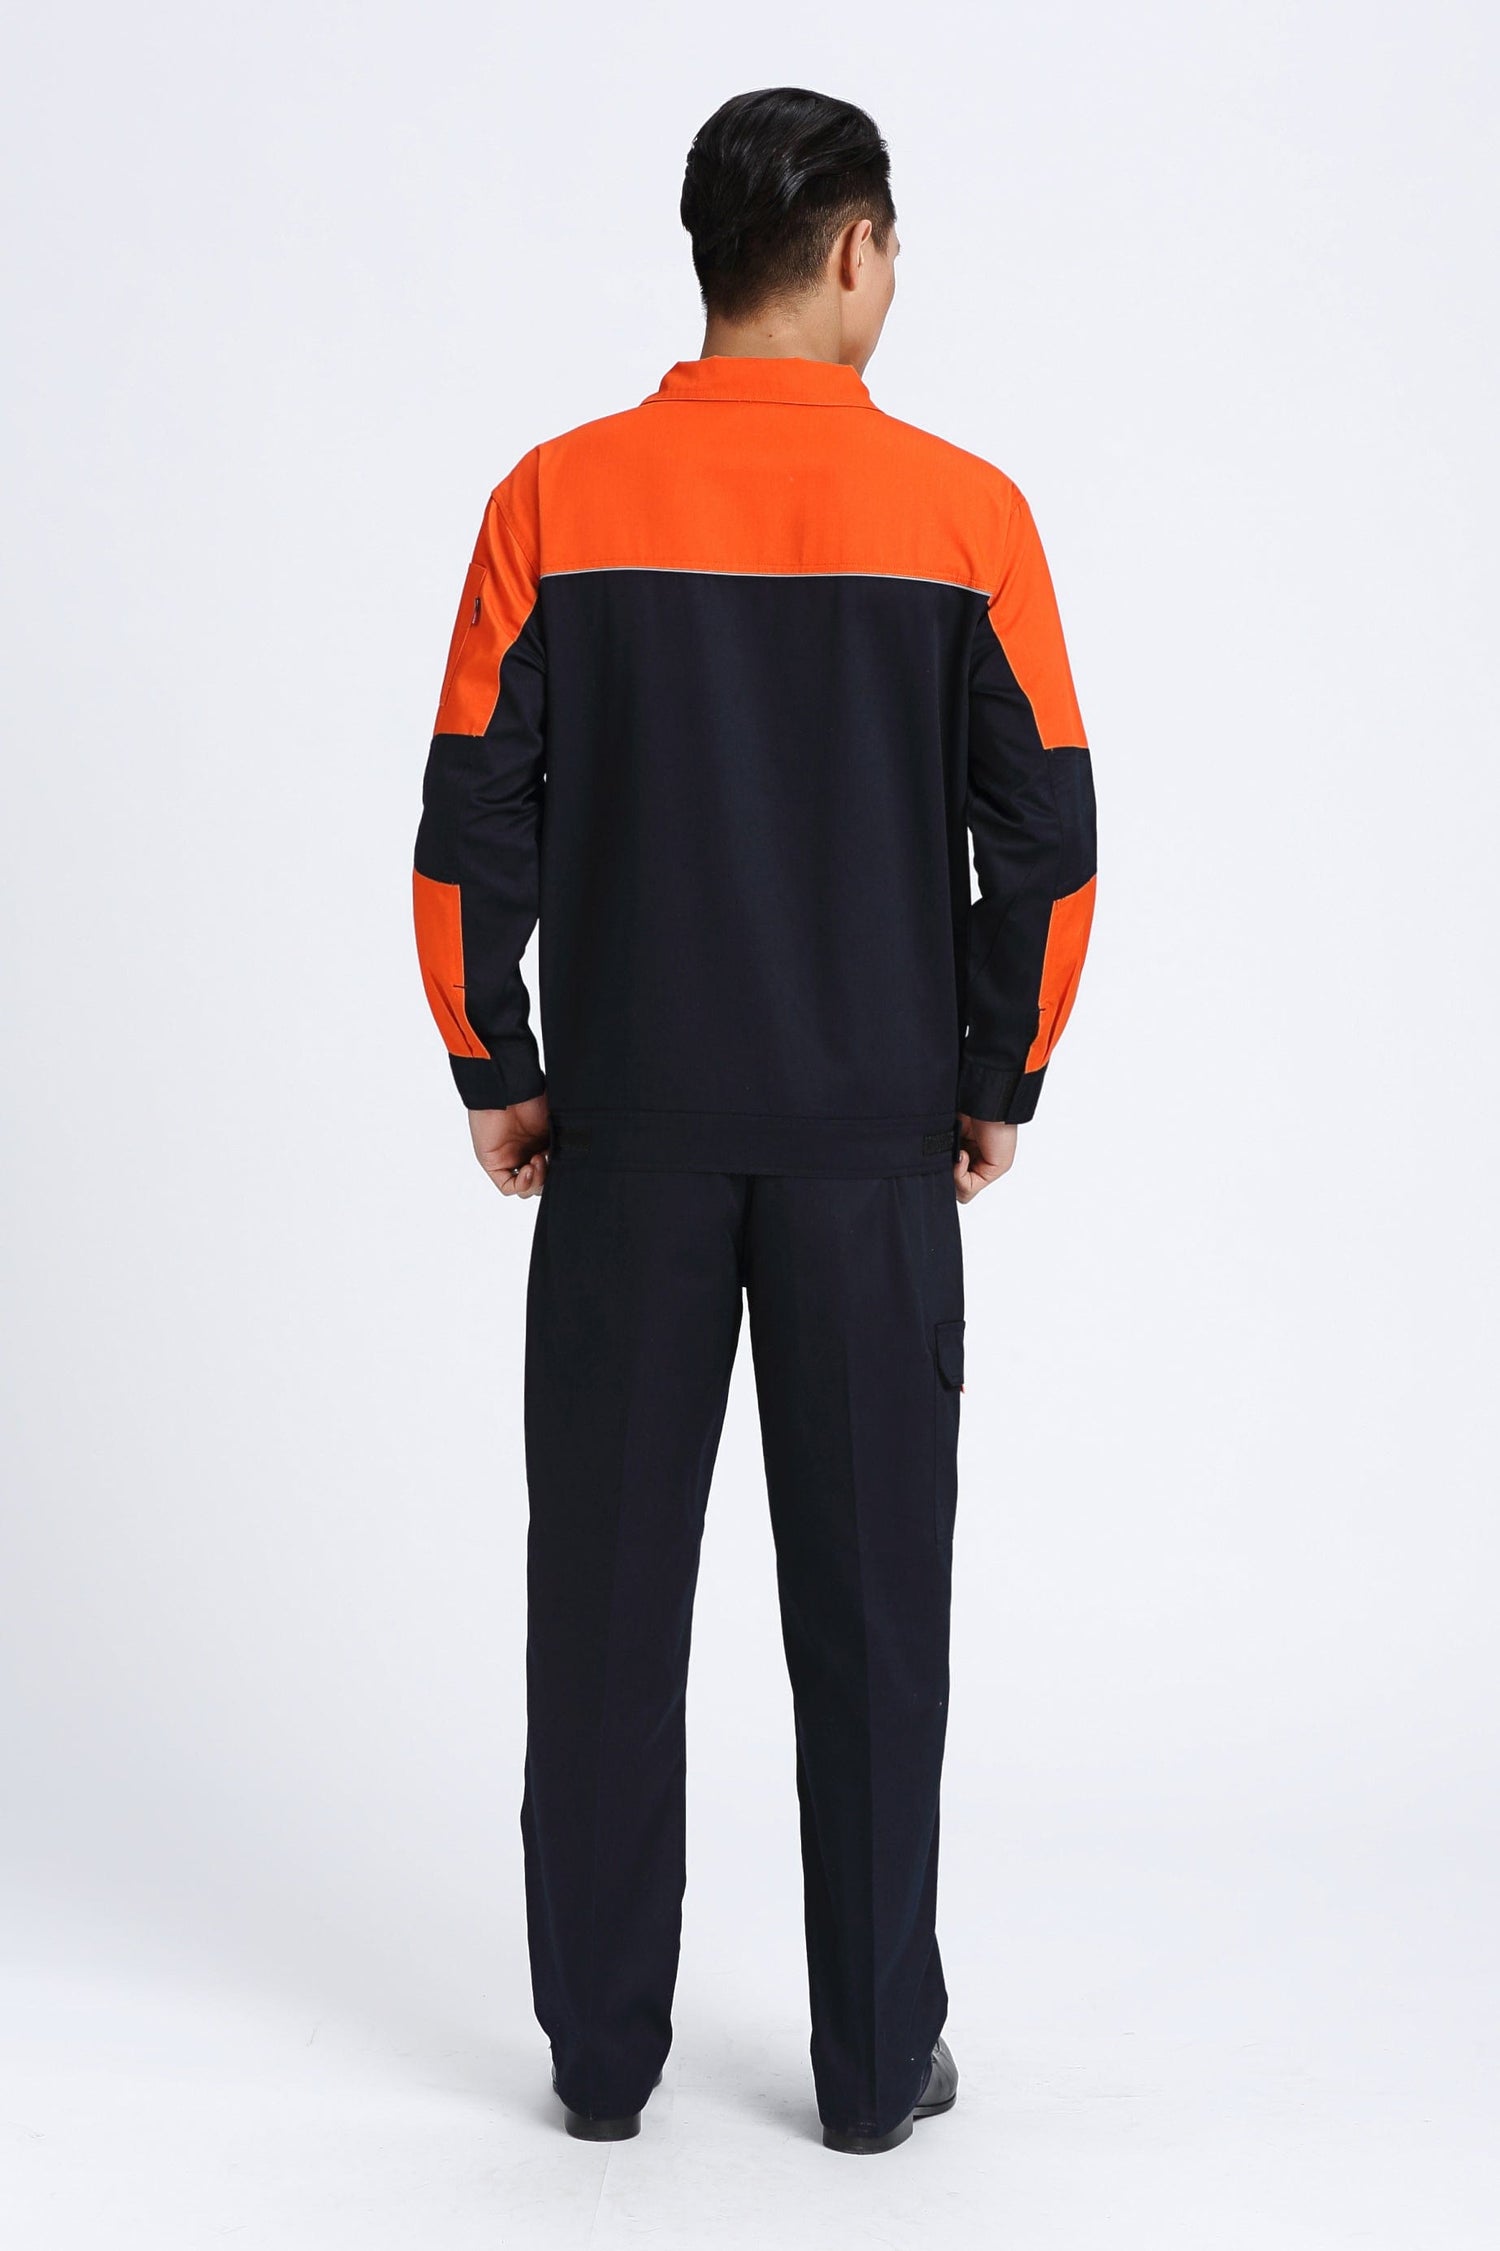 Corals Trading Co. 可樂思百貨商行 涤棉 Spring and Autumn Long Sleeve Polyester-Cotton Workwear SD-W2502